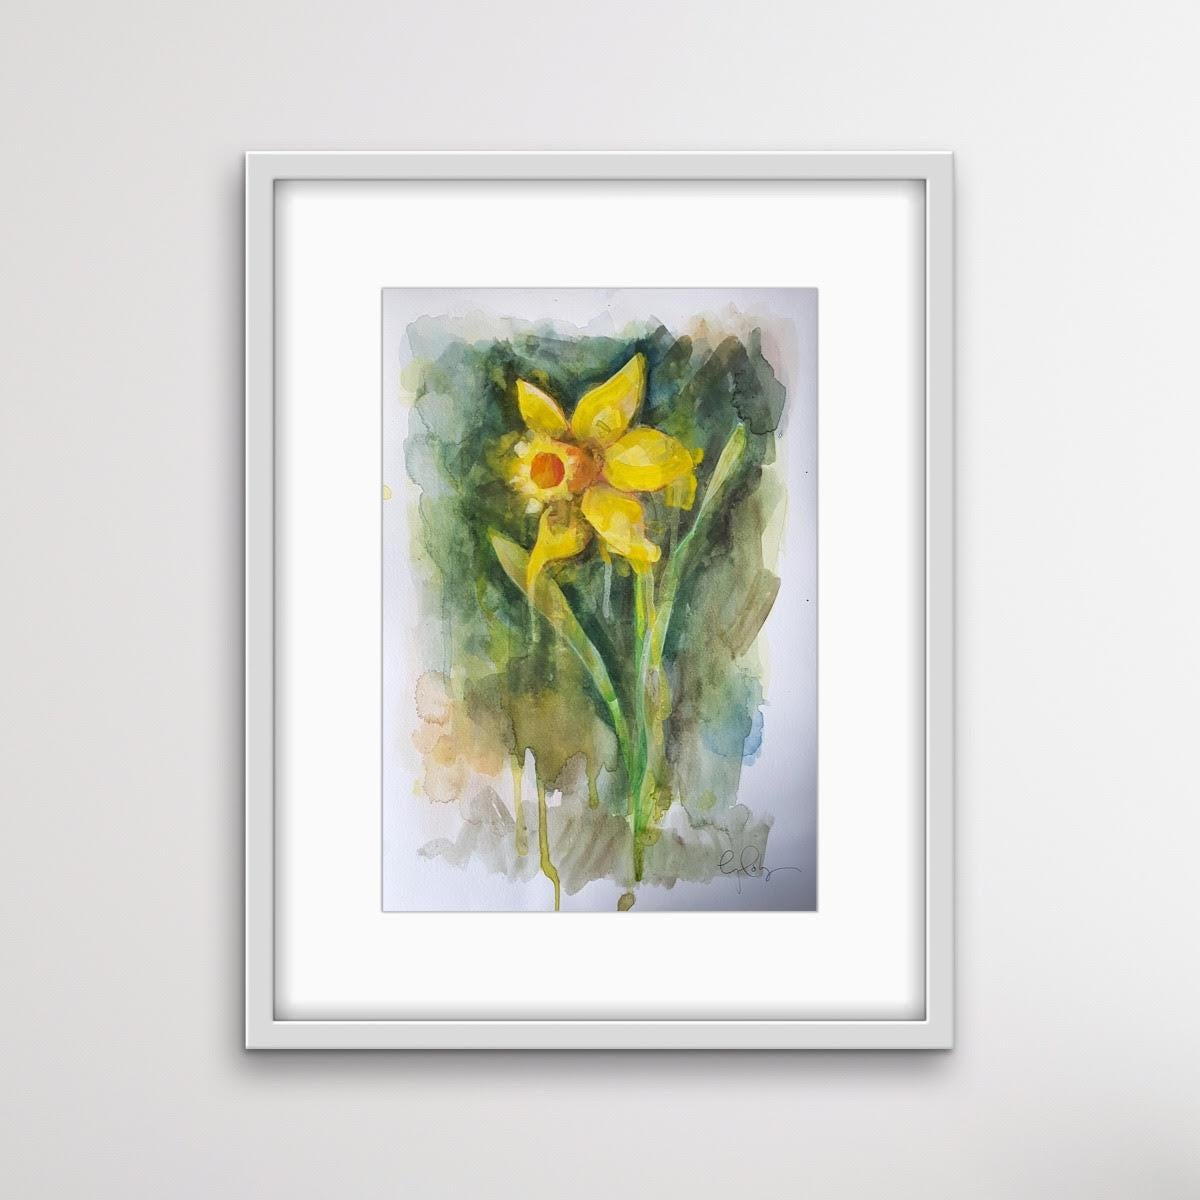 Daffodil by Gavin Dobson, contemporary art, original painting, watercolour paint 2